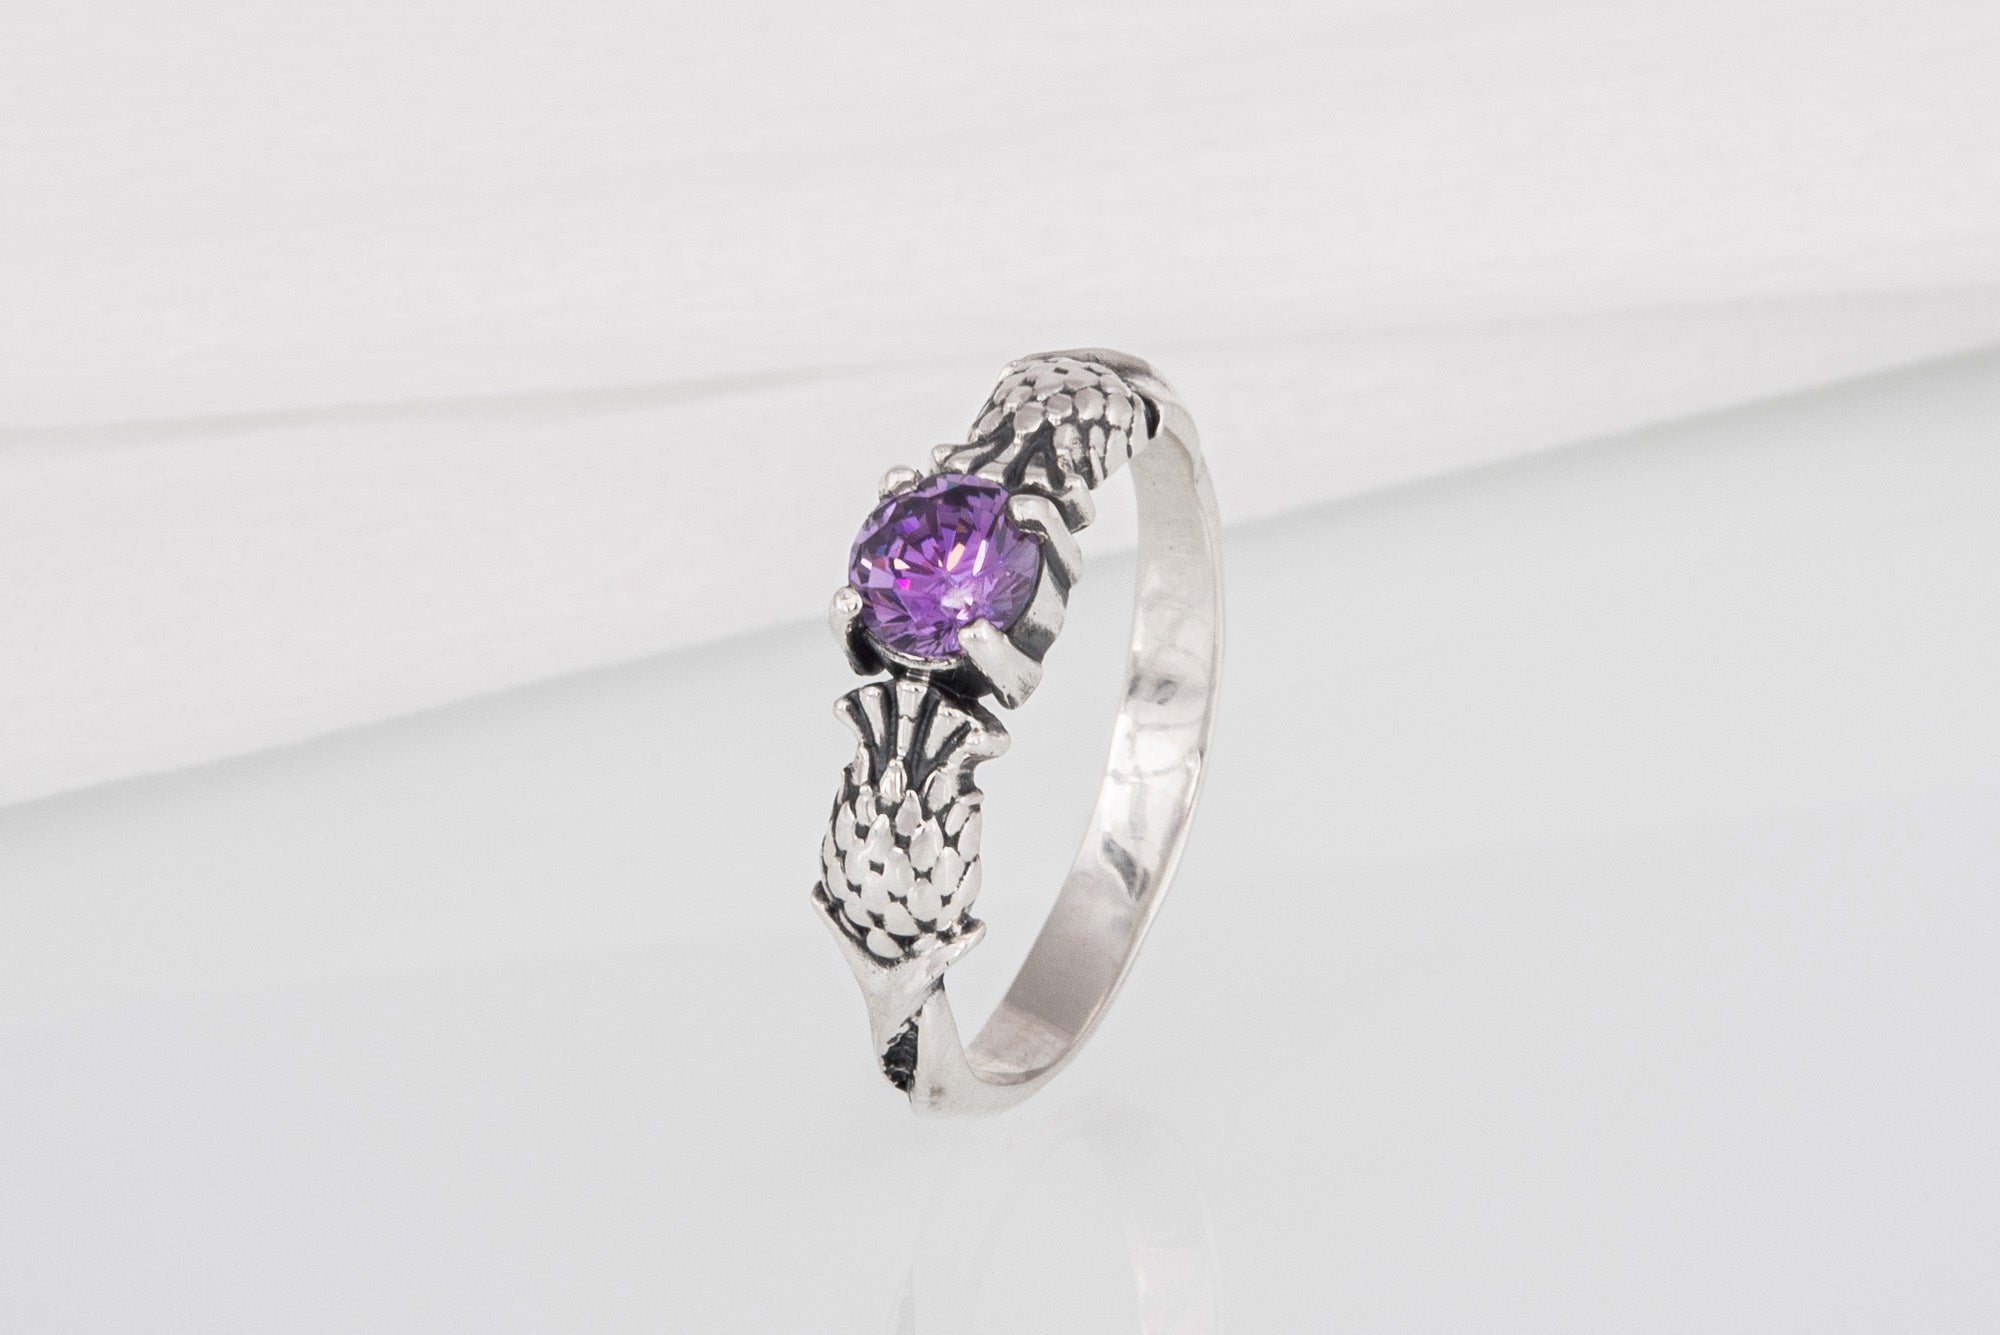 Stylish 925 silver Fashion ring with Thistle and purple gem, unique handcrafted jewelry - vikingworkshop